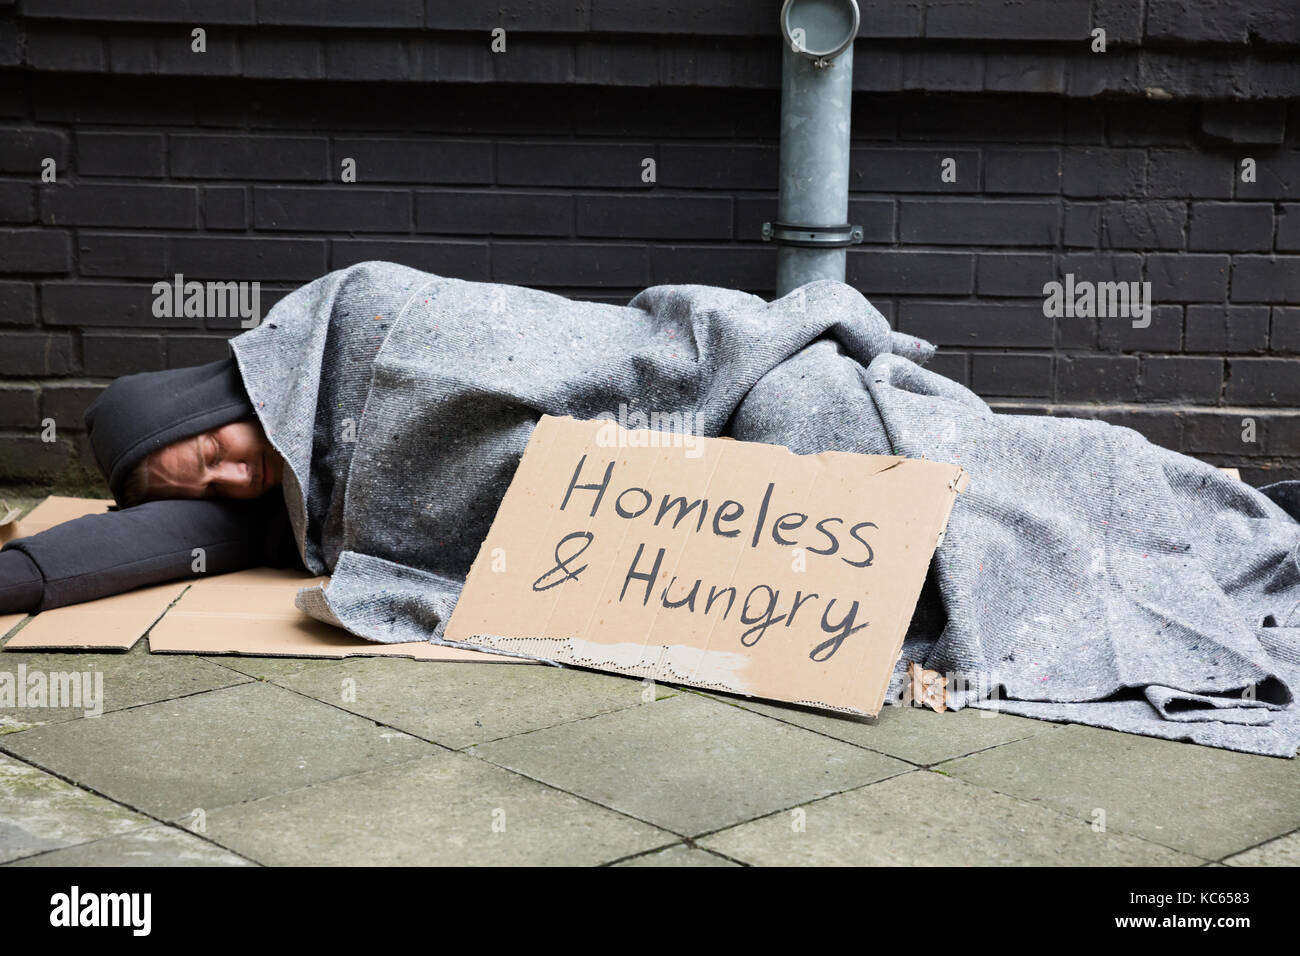 Homeless And Hungry Man Sleeping On Street With Begging Signboard Stock Photo